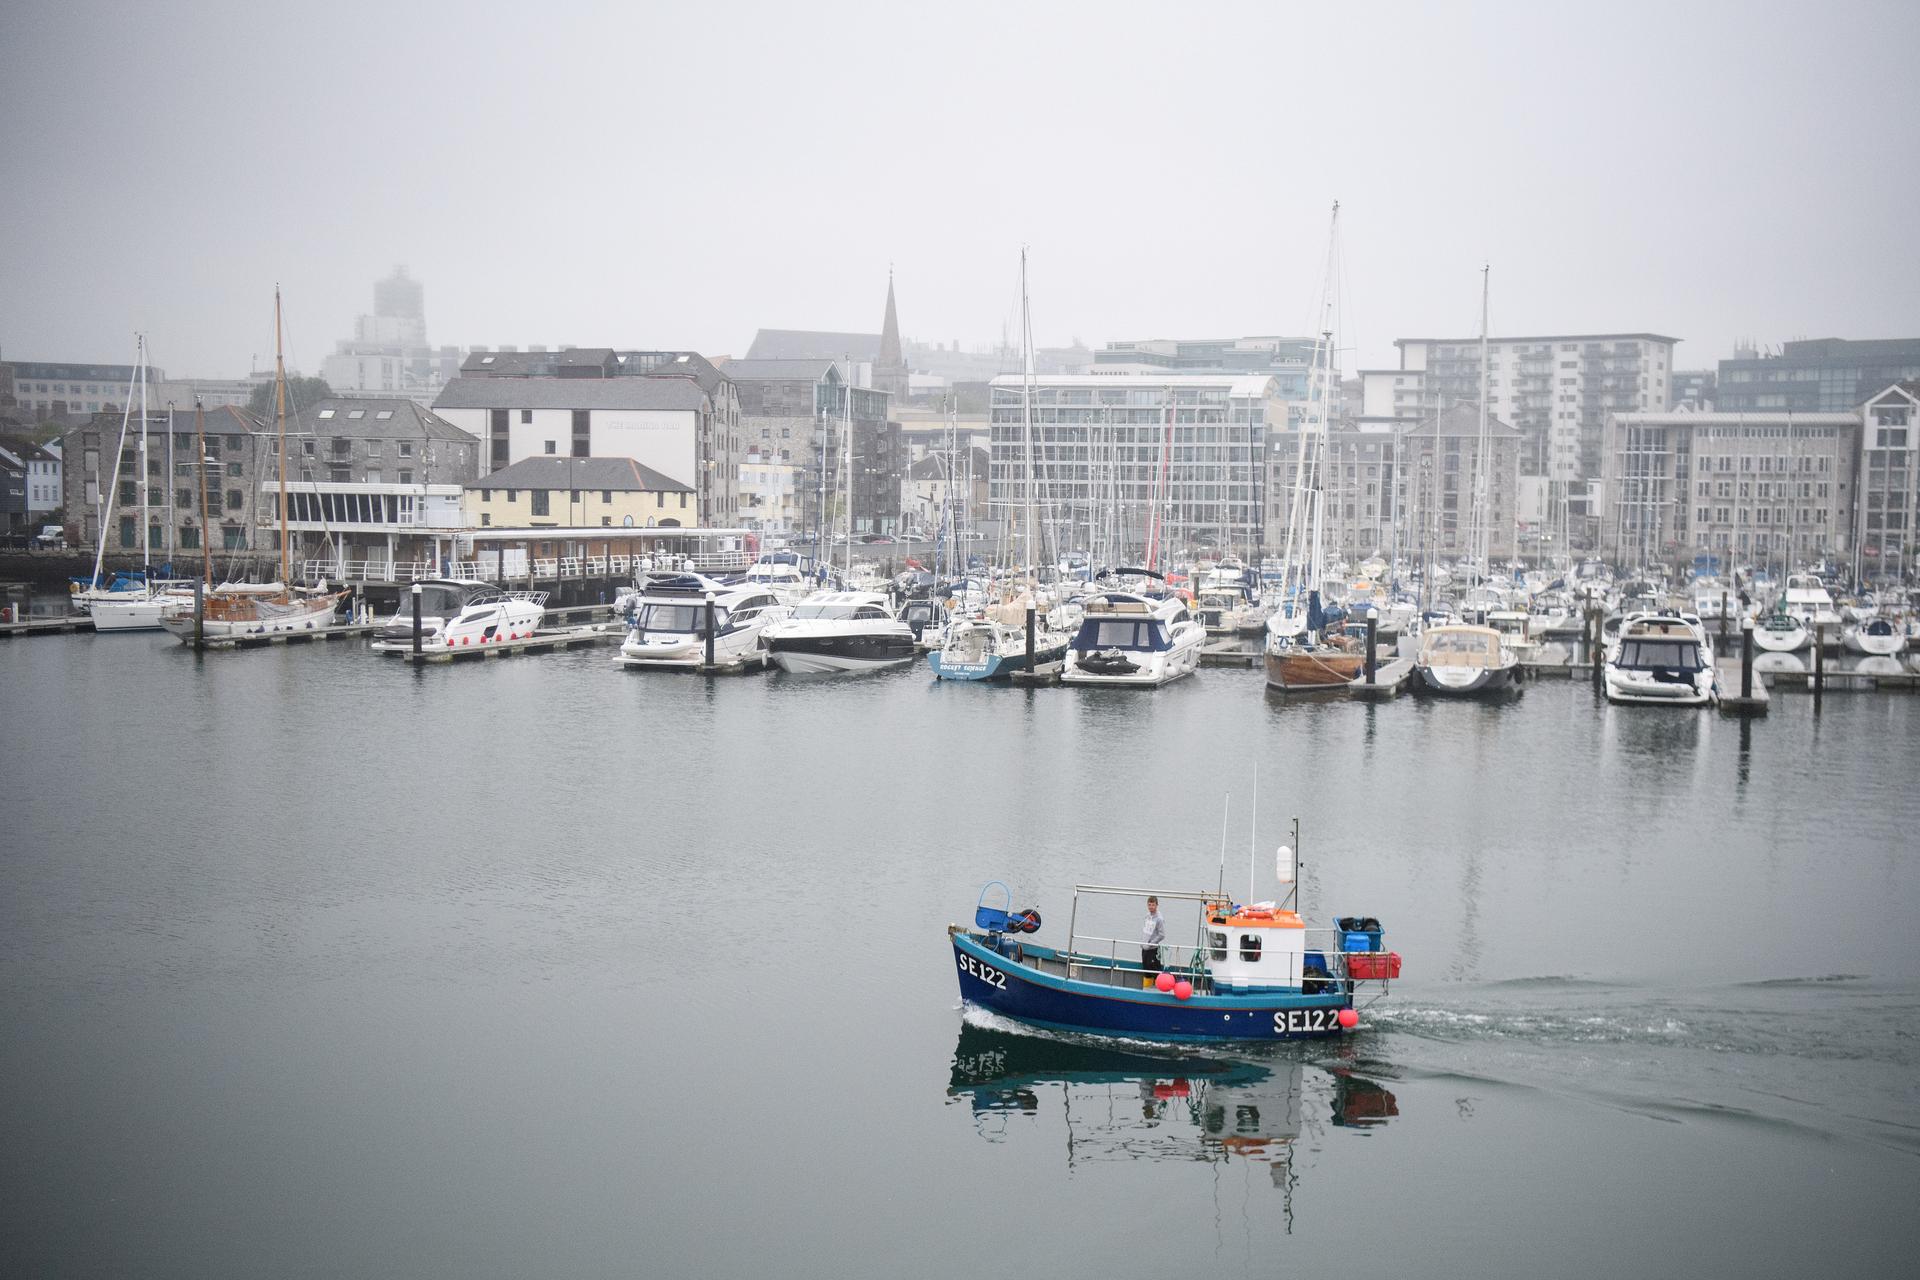 A fishing boat sails from the harbor in Plymouth